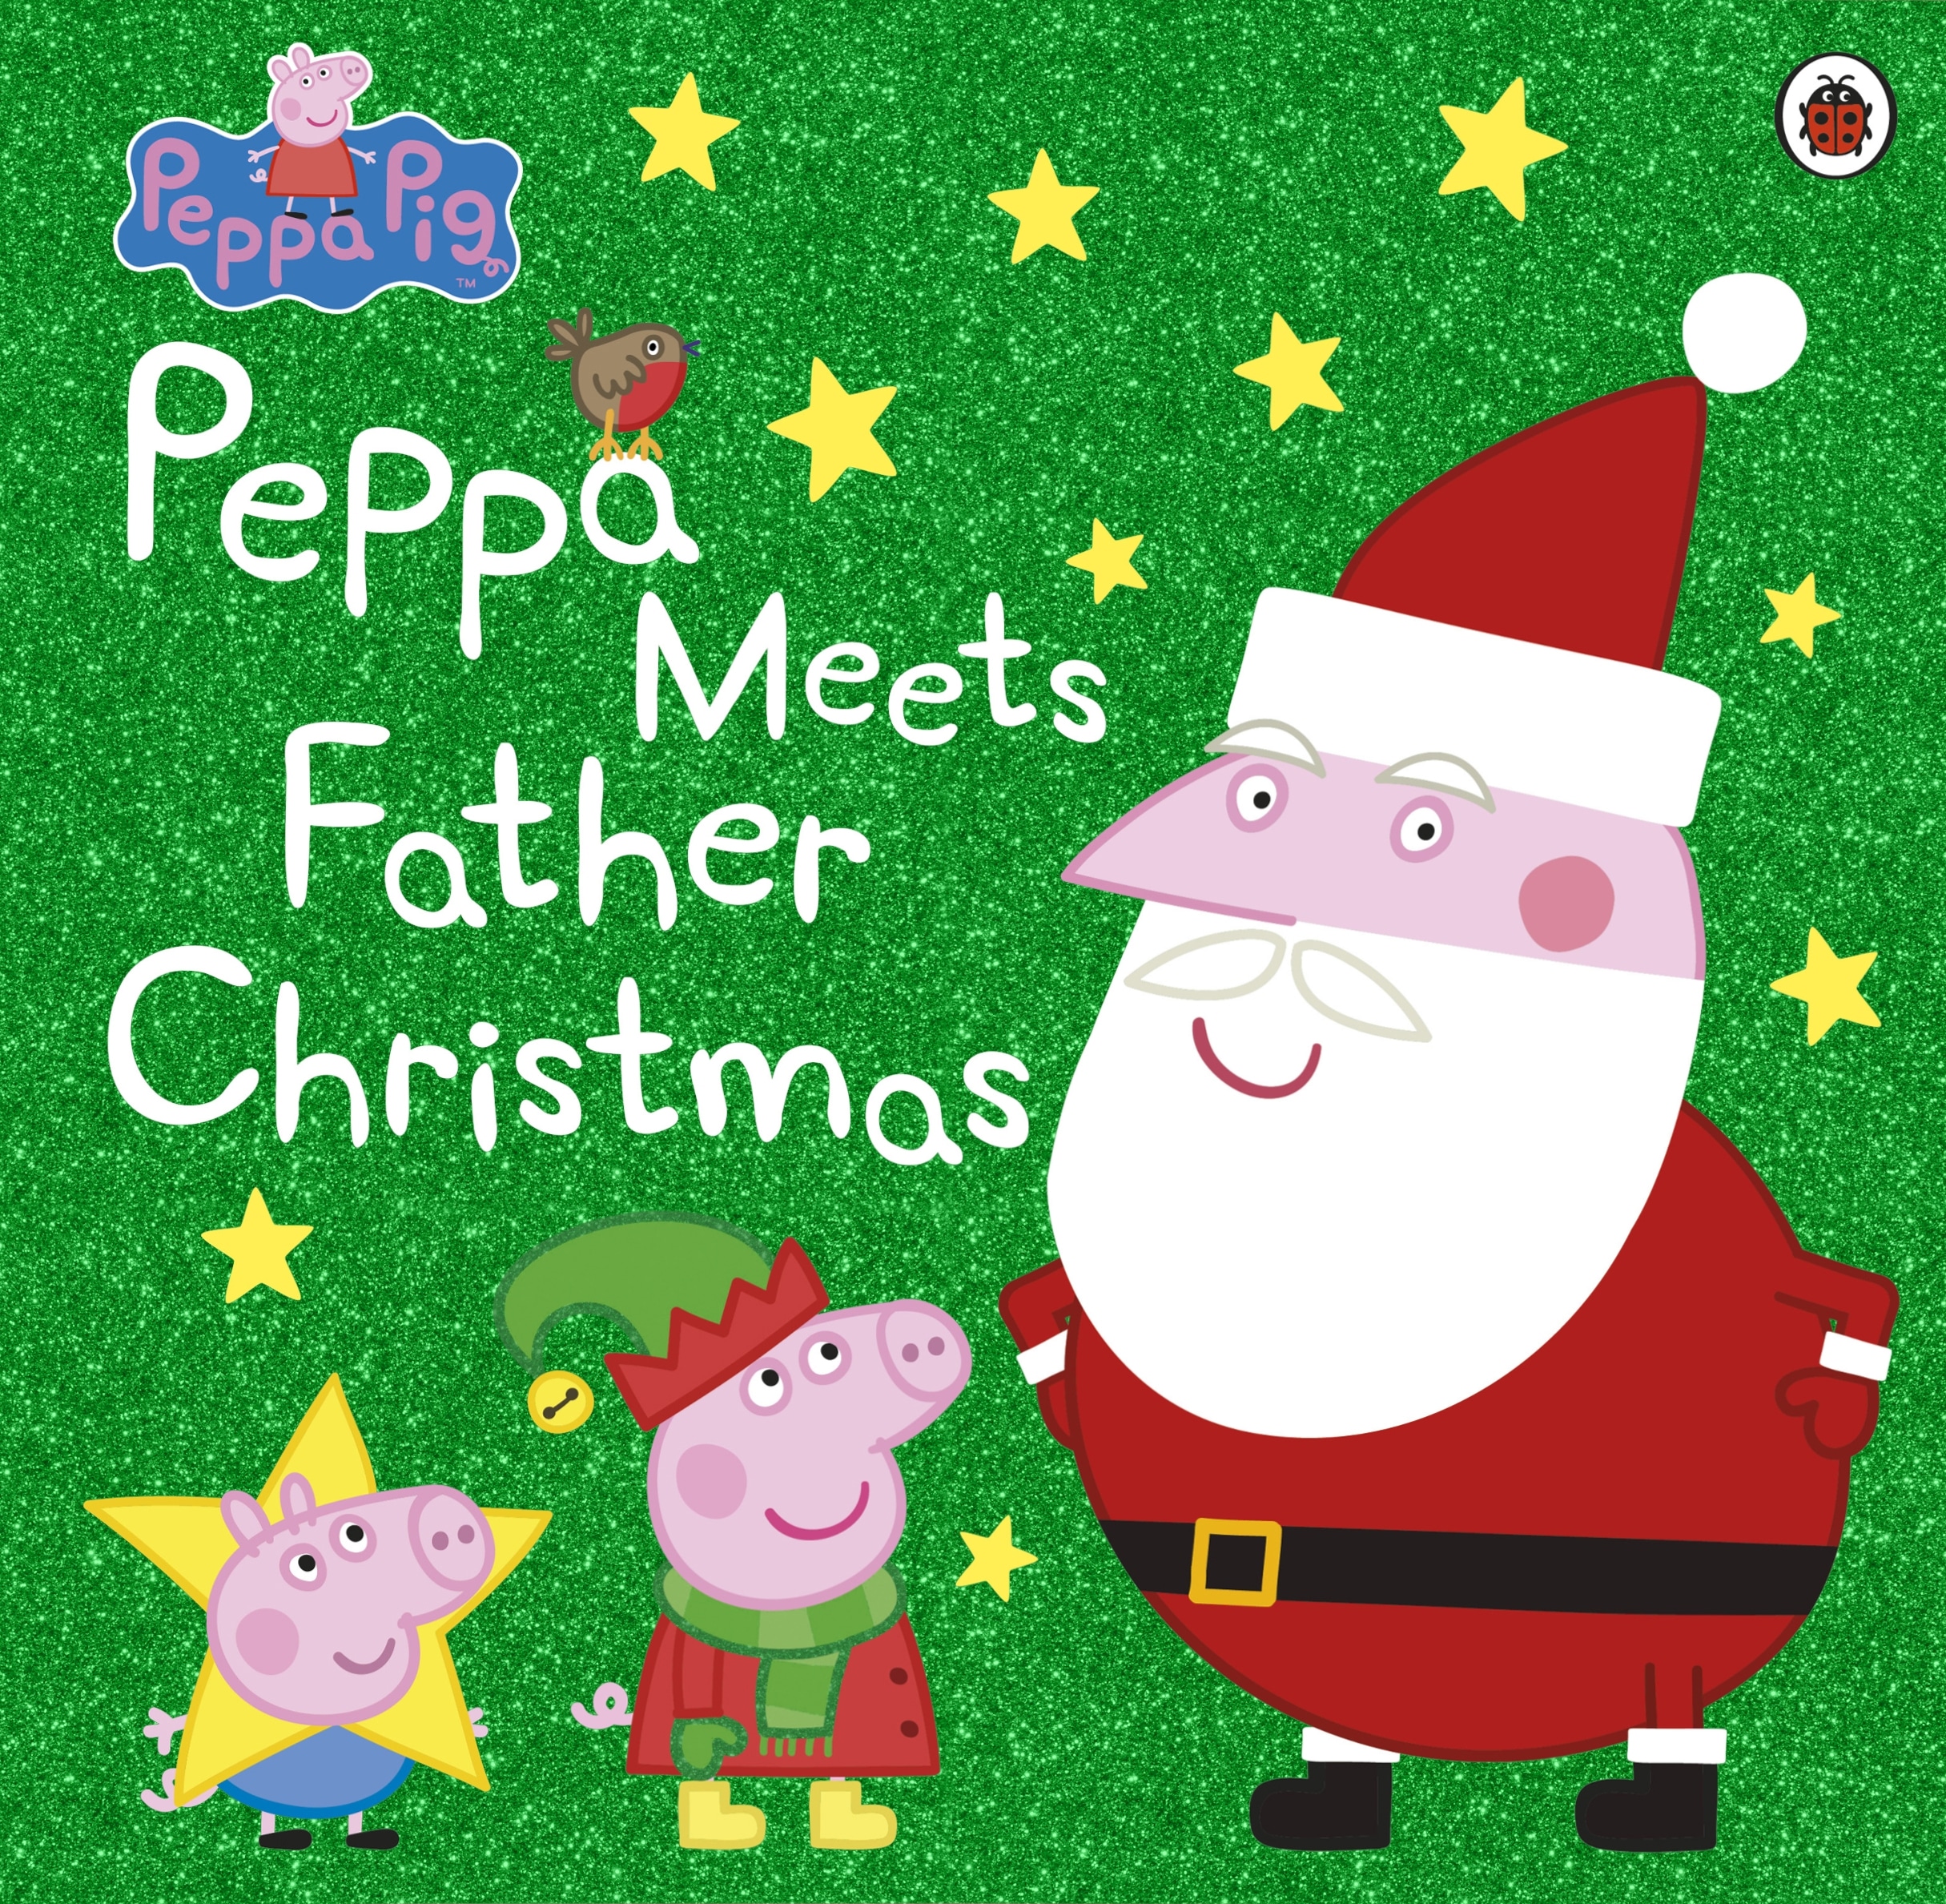 Book “Peppa Pig: Peppa Meets Father Christmas” by Peppa Pig — October 4, 2018